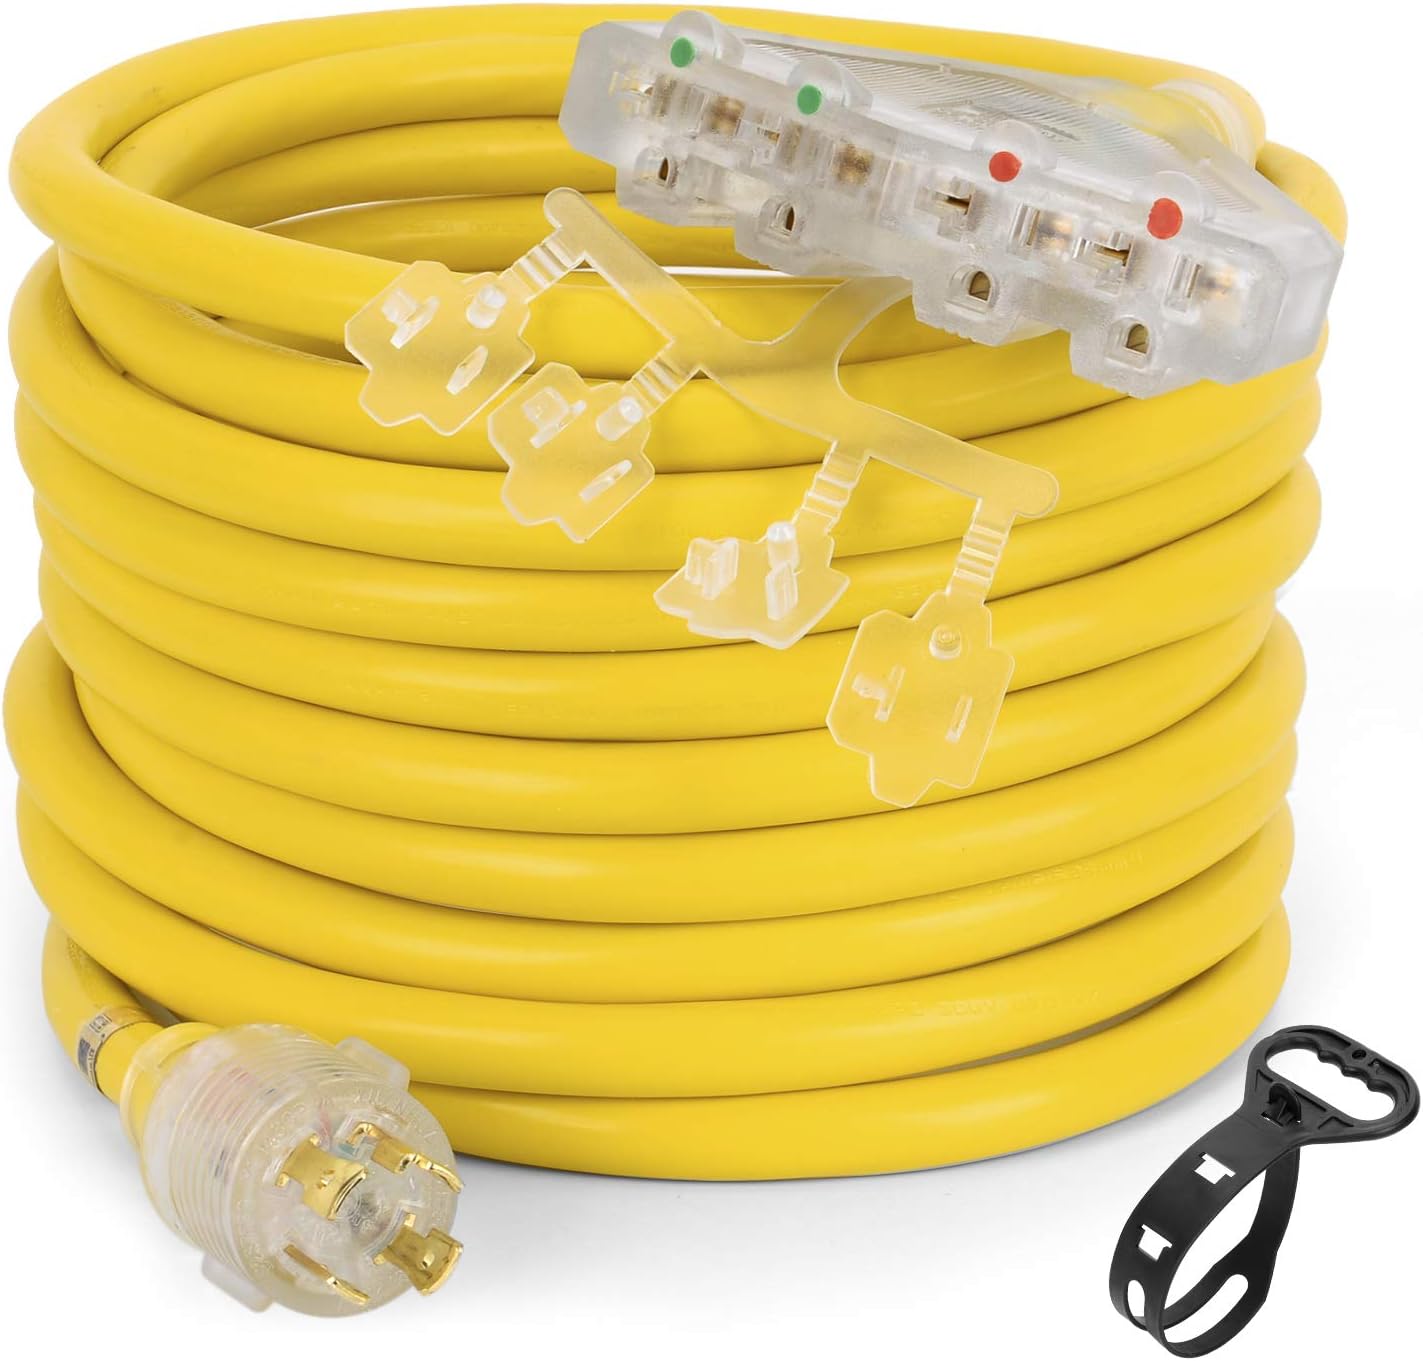 25 Feet Generator Extension Cord Review